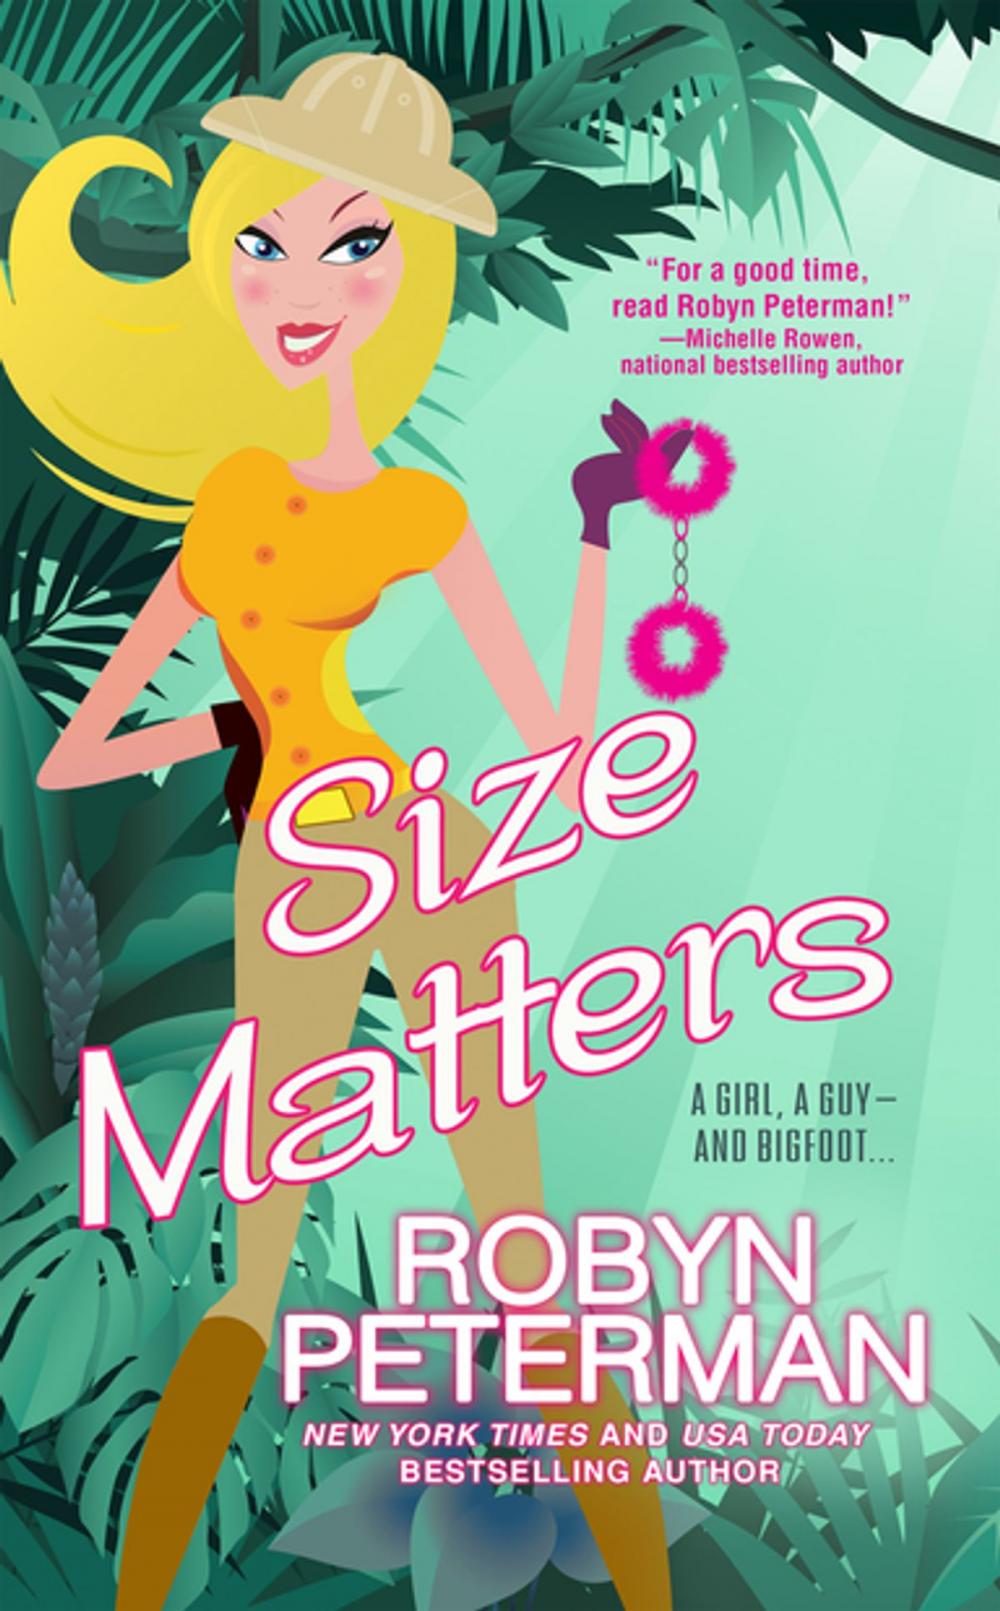 Big bigCover of Size Matters